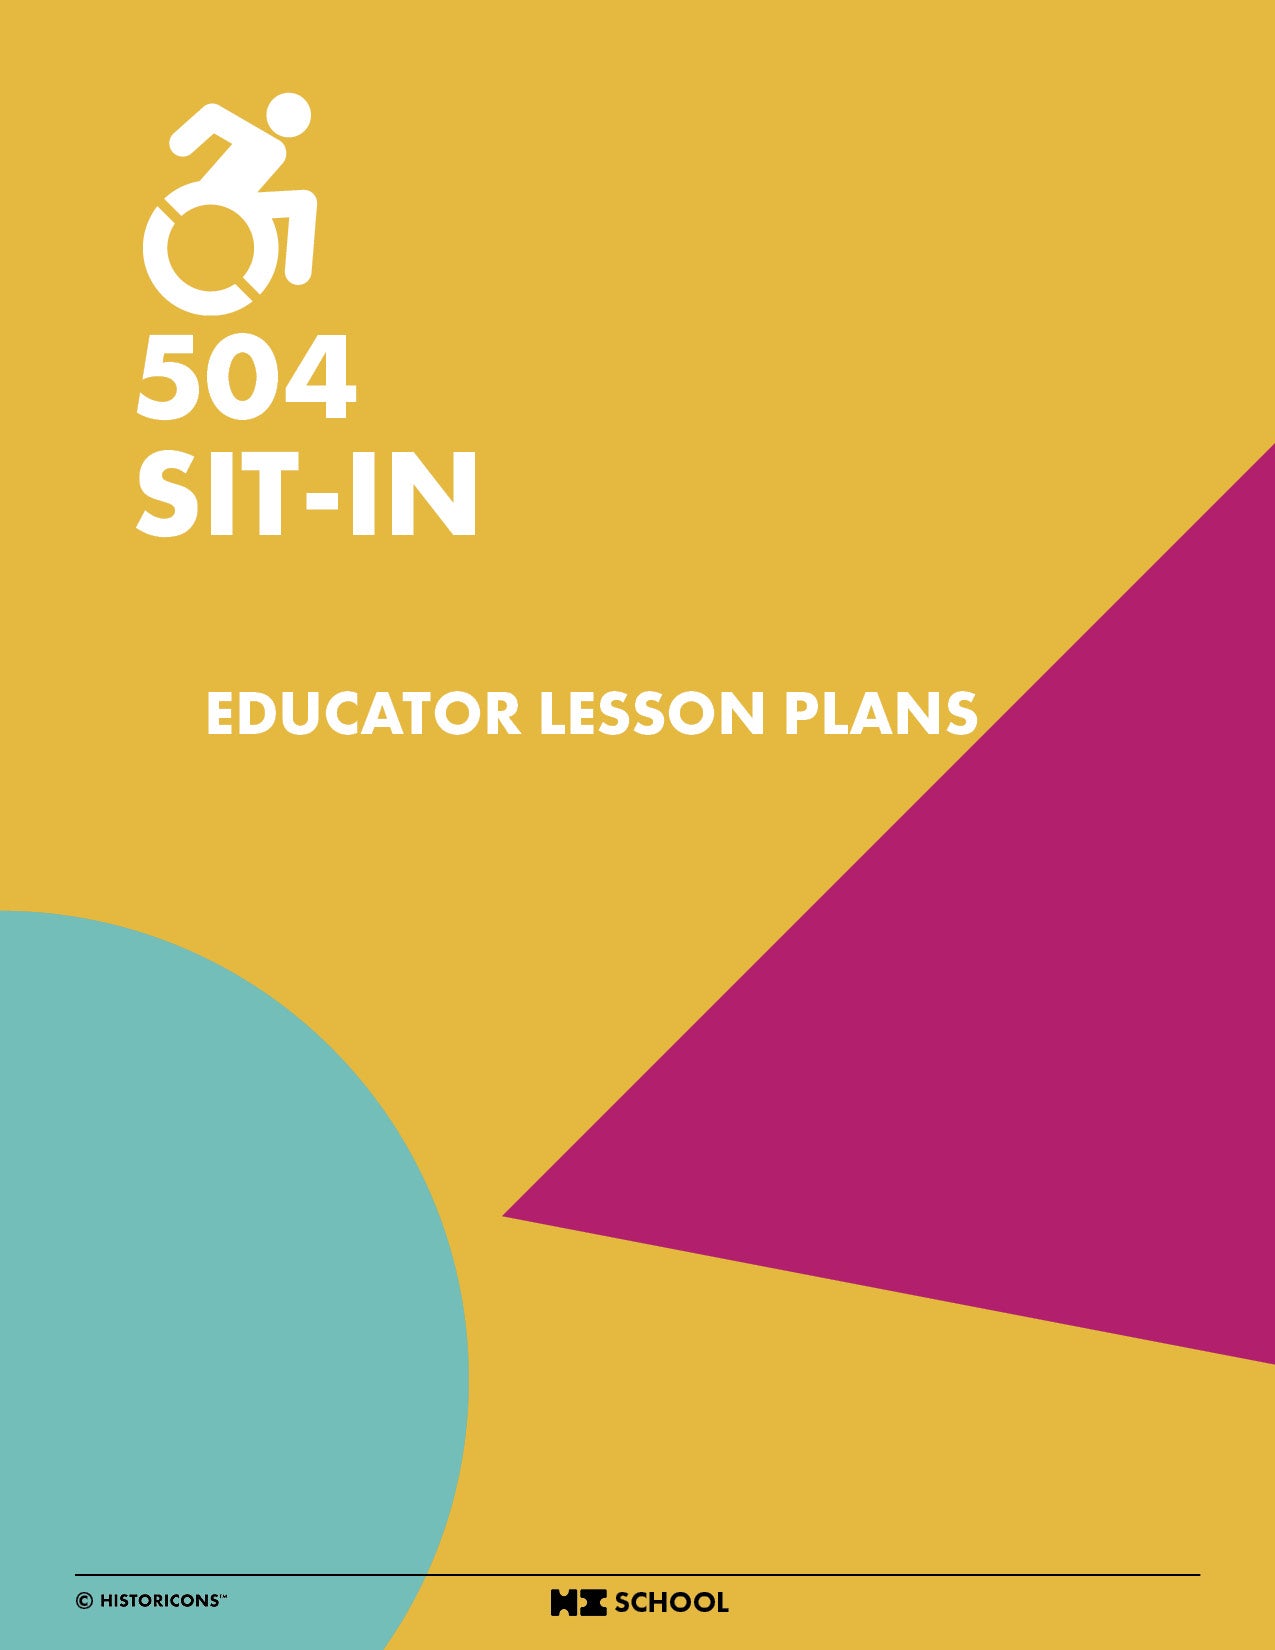 A colorful yellow, teal and magenta cover photo of the HI School 504 Sit-In educator lesson plans is displayed. A classroom symbol signifies that this classroom resource is suitable for use with elementary and middle school students. A download symbol signifies that the activity pack is available to download as a pdf.